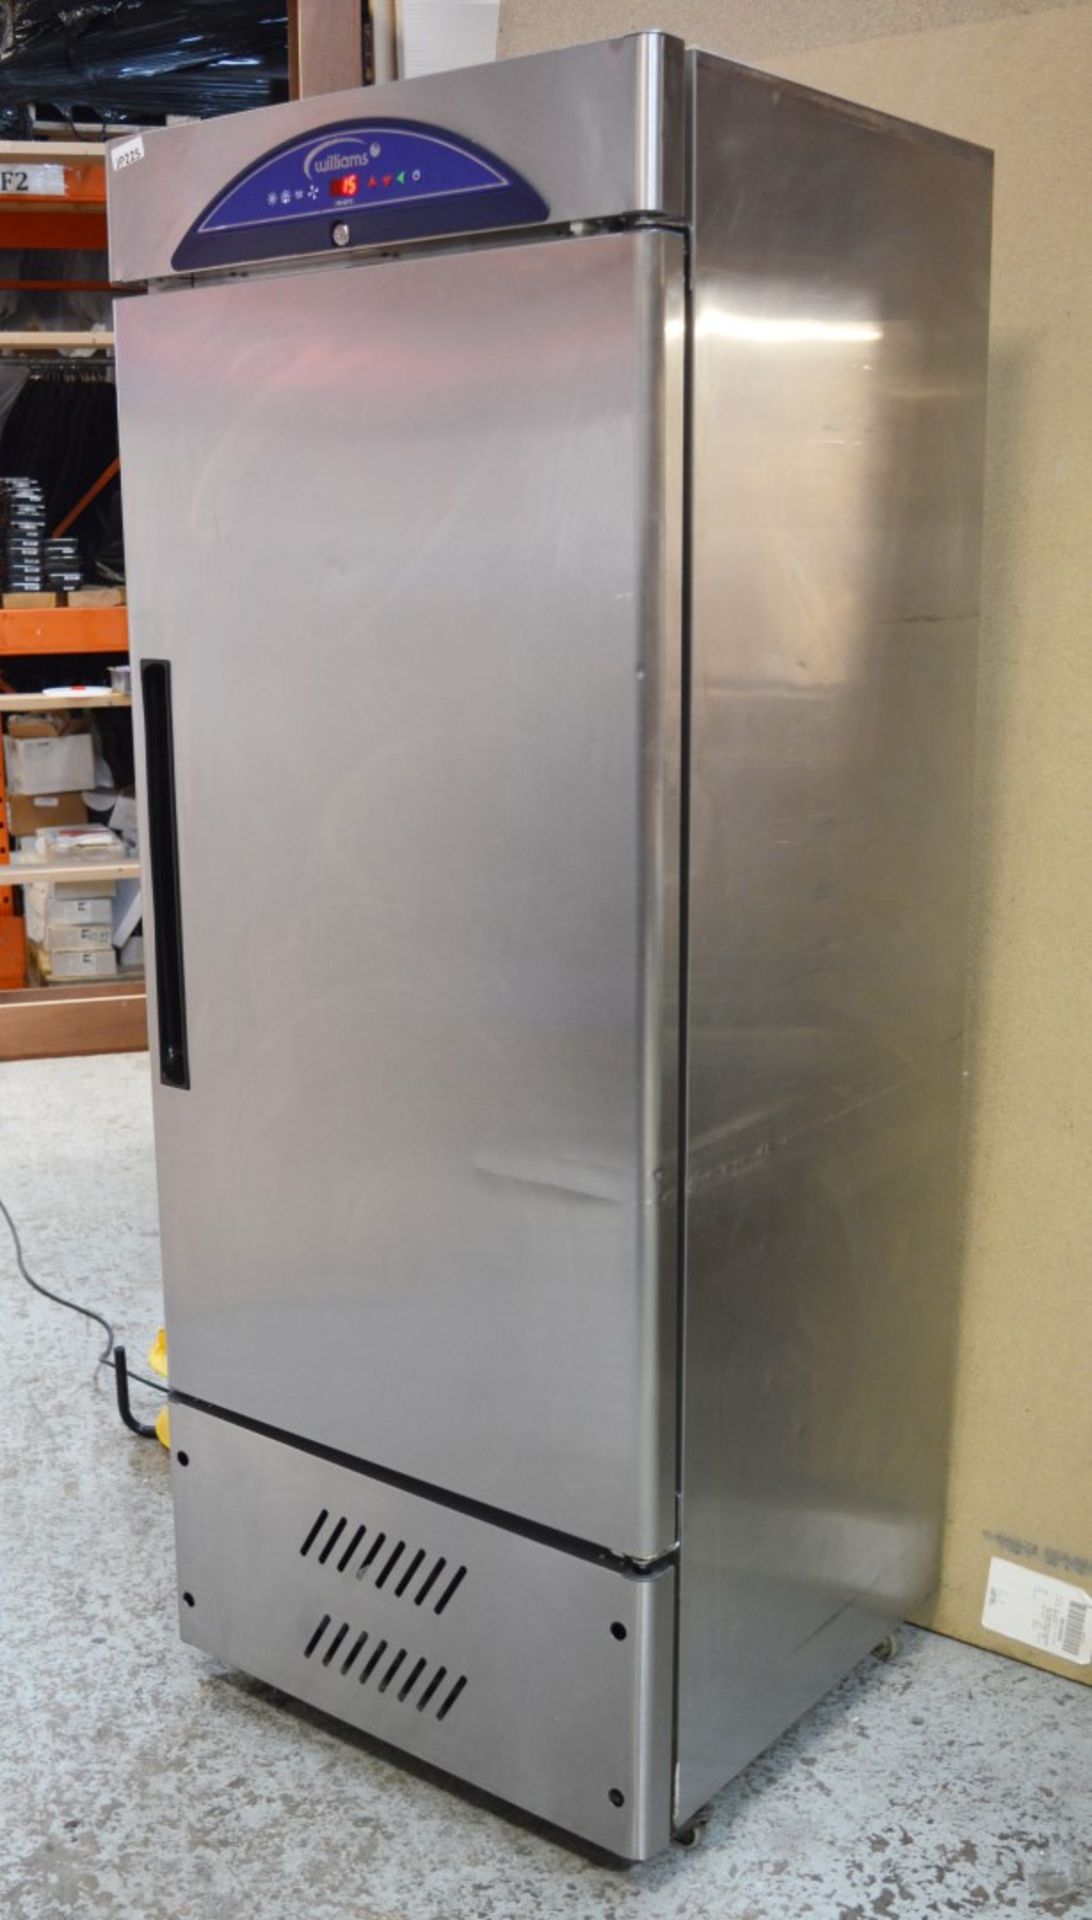 1 x Williams Single Door Upright Freezer - Model LZ16-WB - Stainless Steel Finish - Suitable For Com